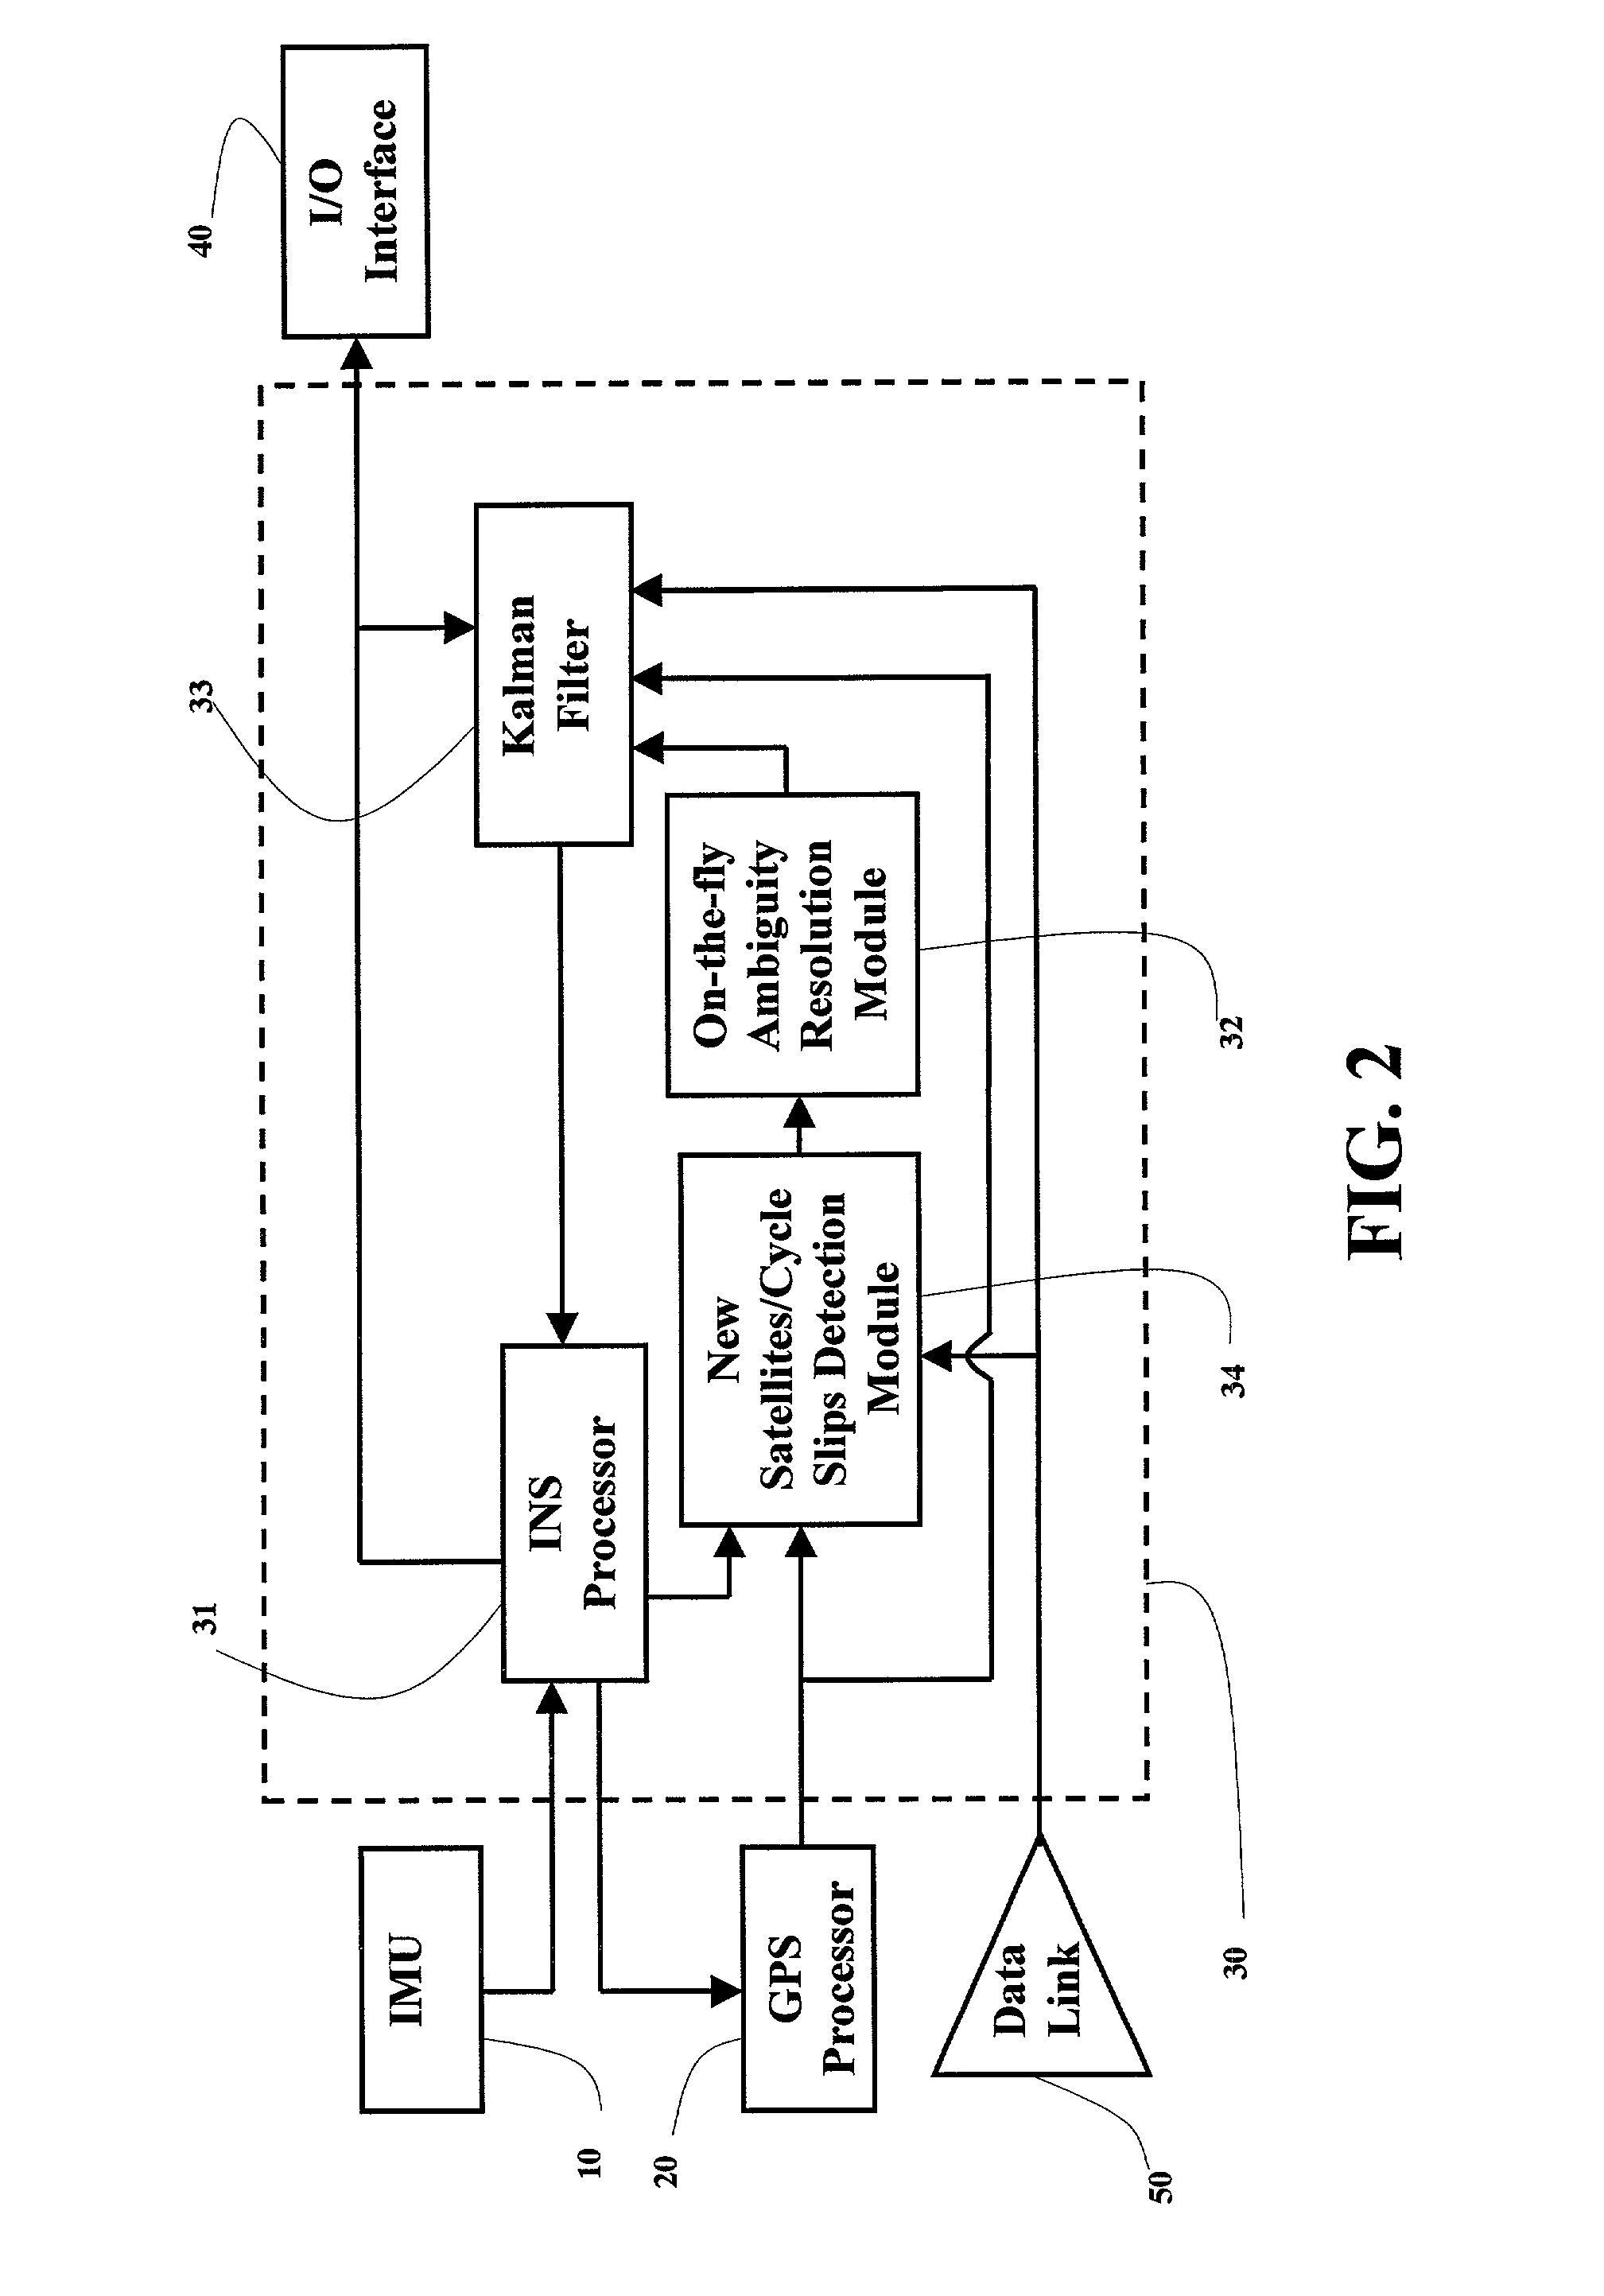 Fully-coupled vehicle positioning method and system thereof